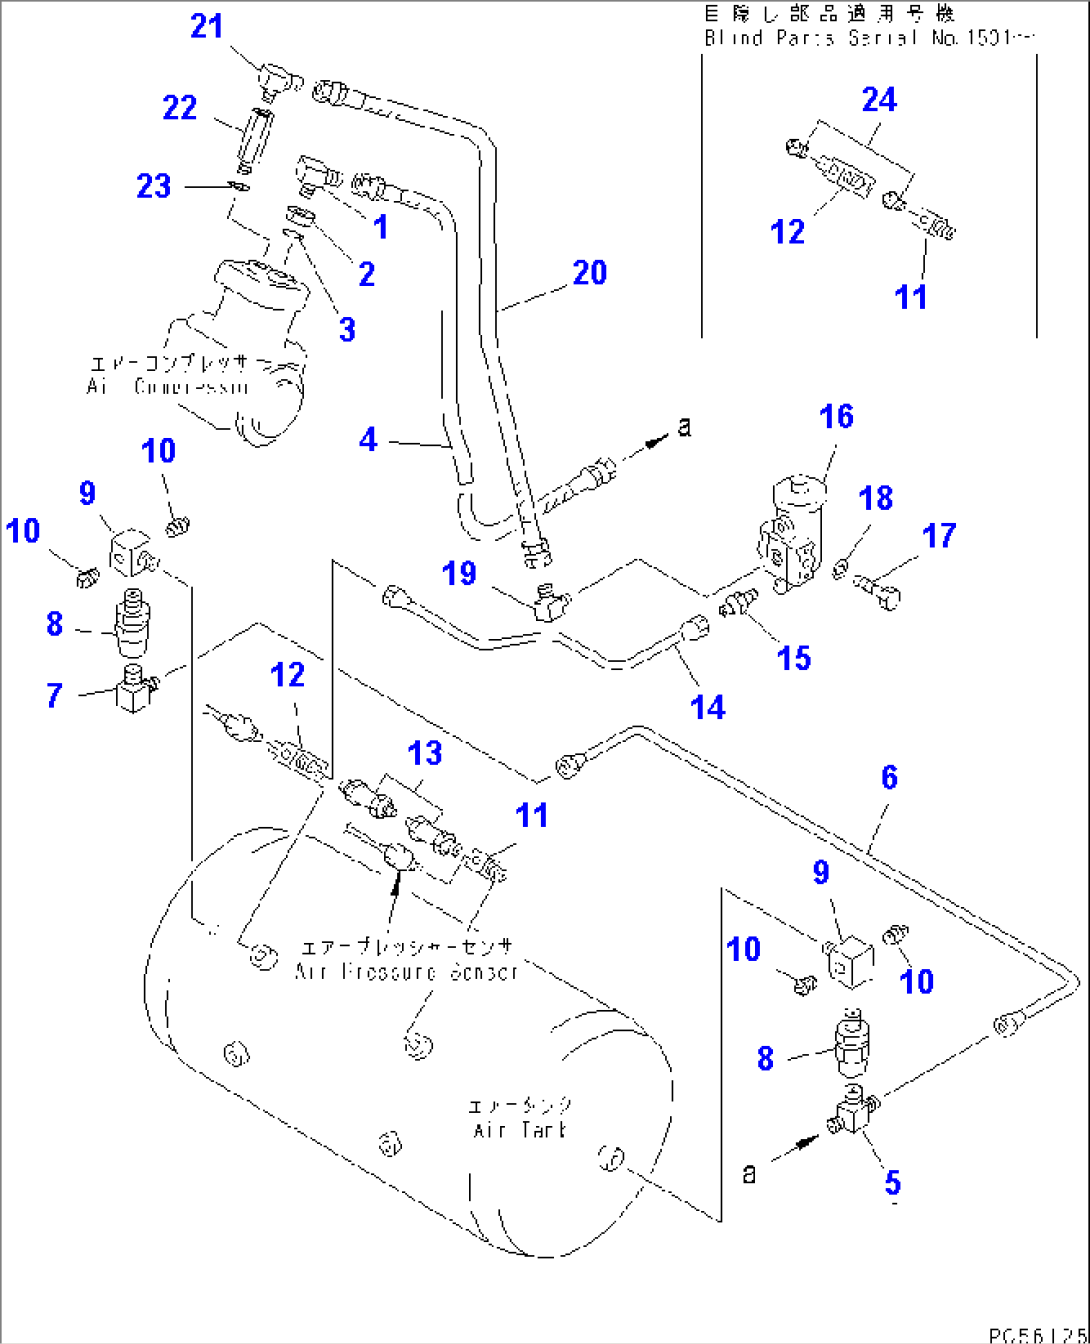 BRAKE PIPING (1/4) (AIR COMPRESSOR TO AIR TANK TO GOVERNOR)